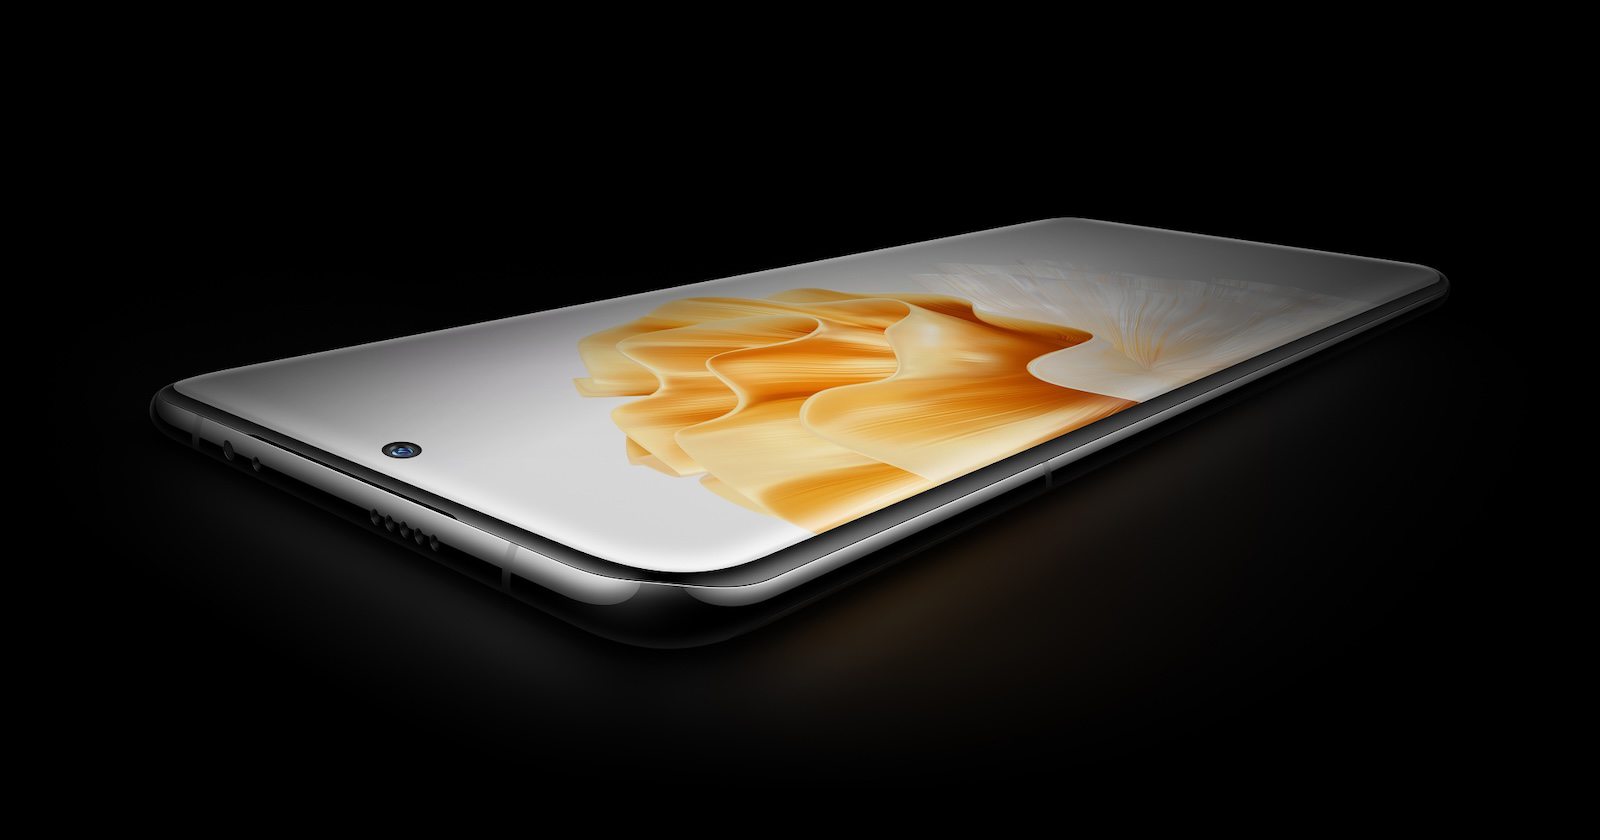 1.5K resolution and OLED display! Huawei P70 design has been revealed